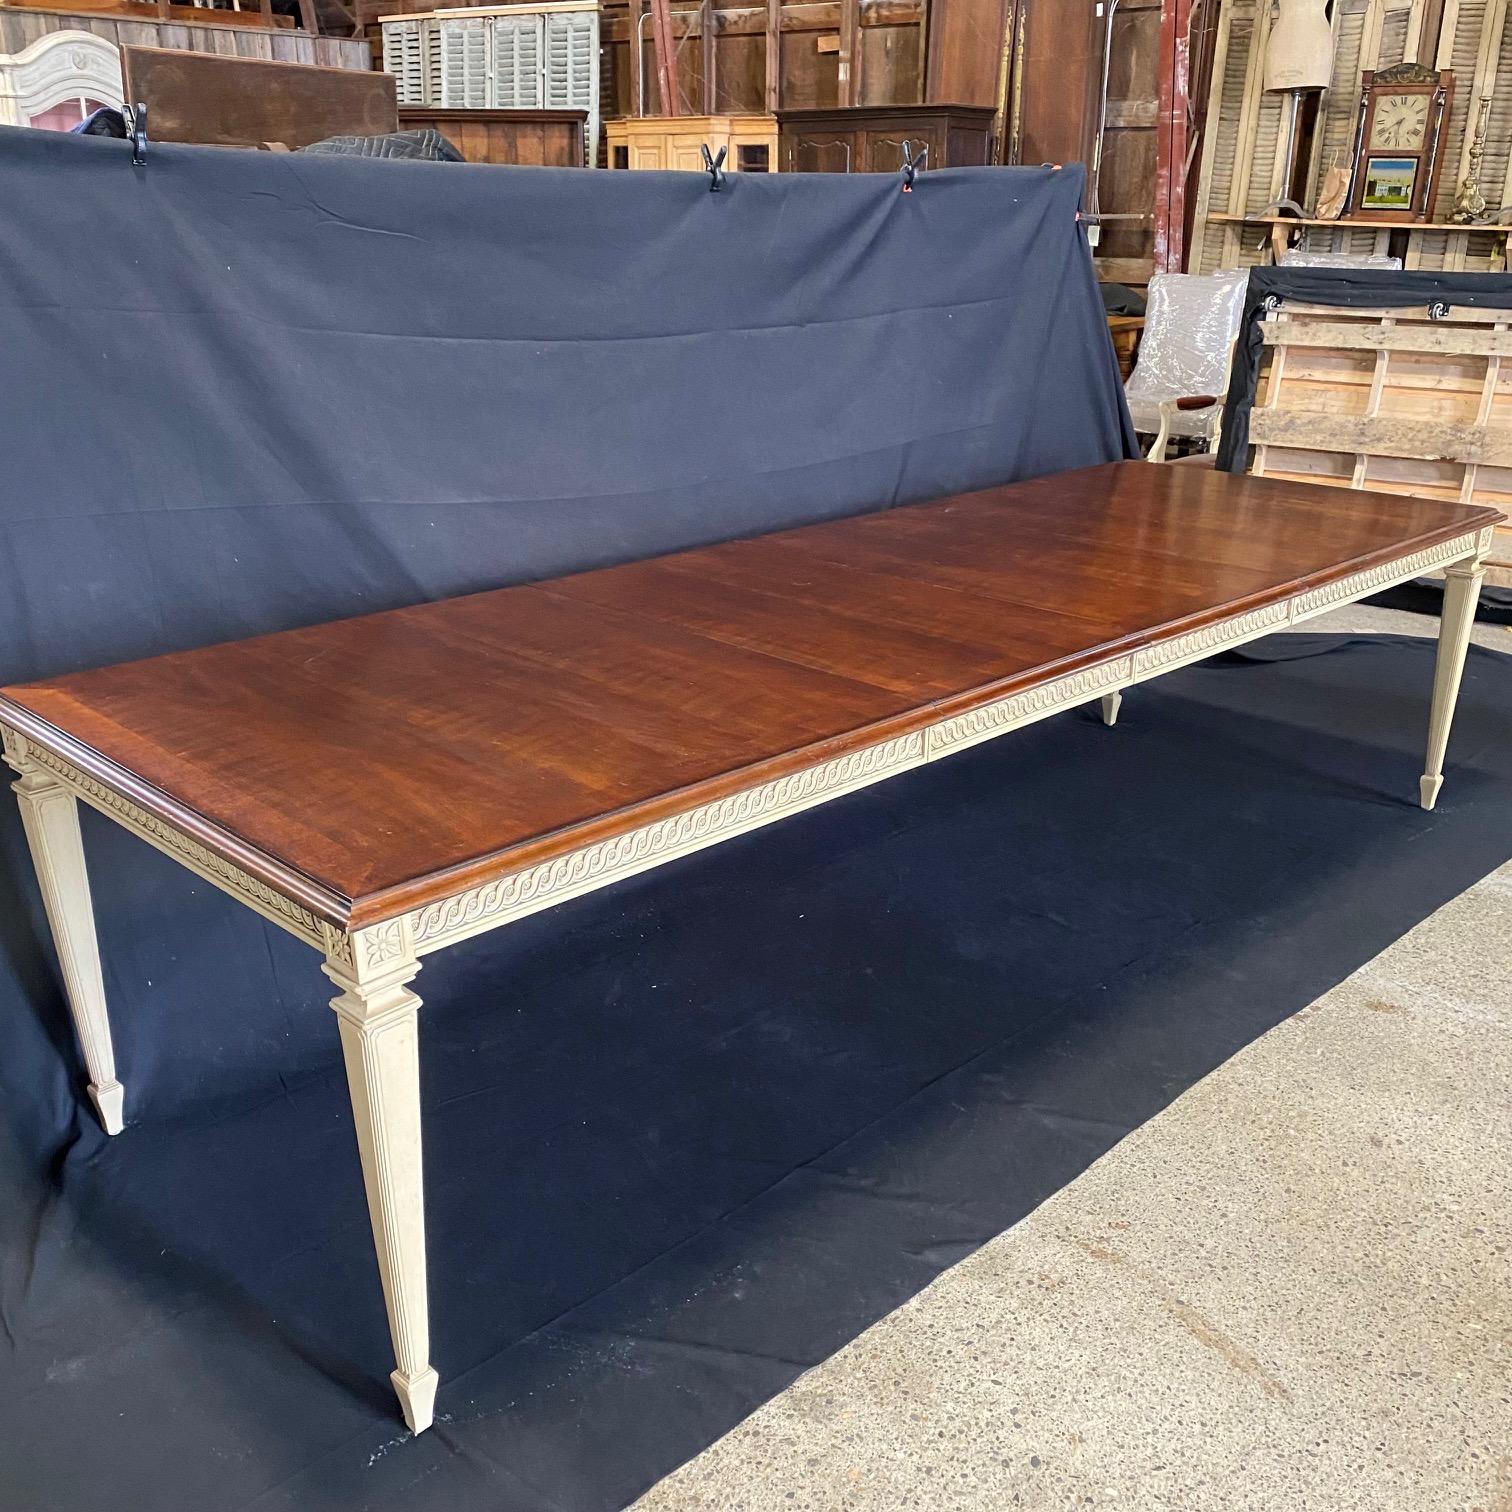 French neoclassical style dining table with carved side details over tapered legs, and lovely richly stained walnut top with banded edge all around. Two large leaves; this lovely table can extend from 6 and a half feet (seating up to 8 people) to